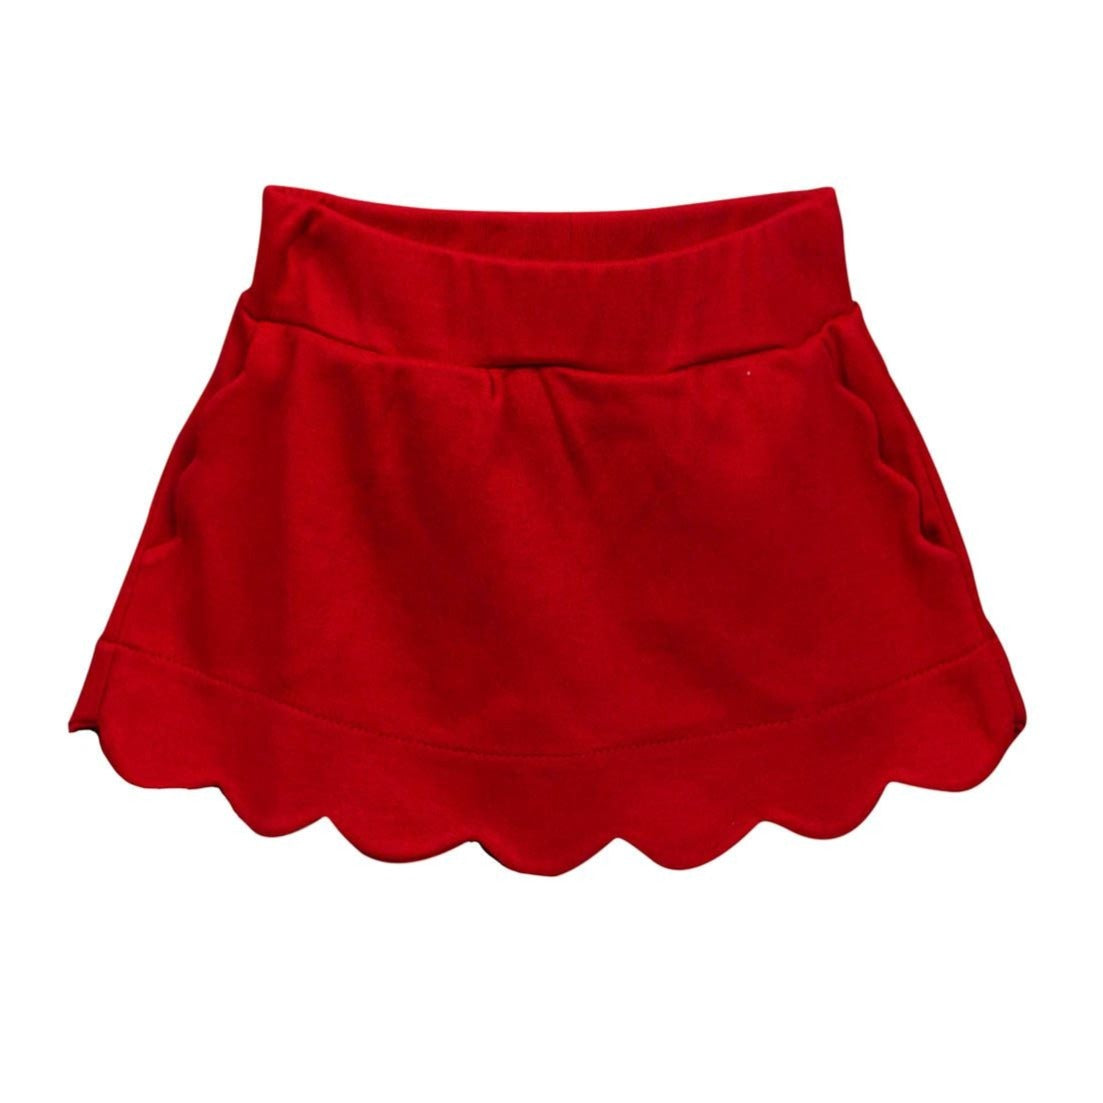 The Proper Peony Red Scallop Skirt